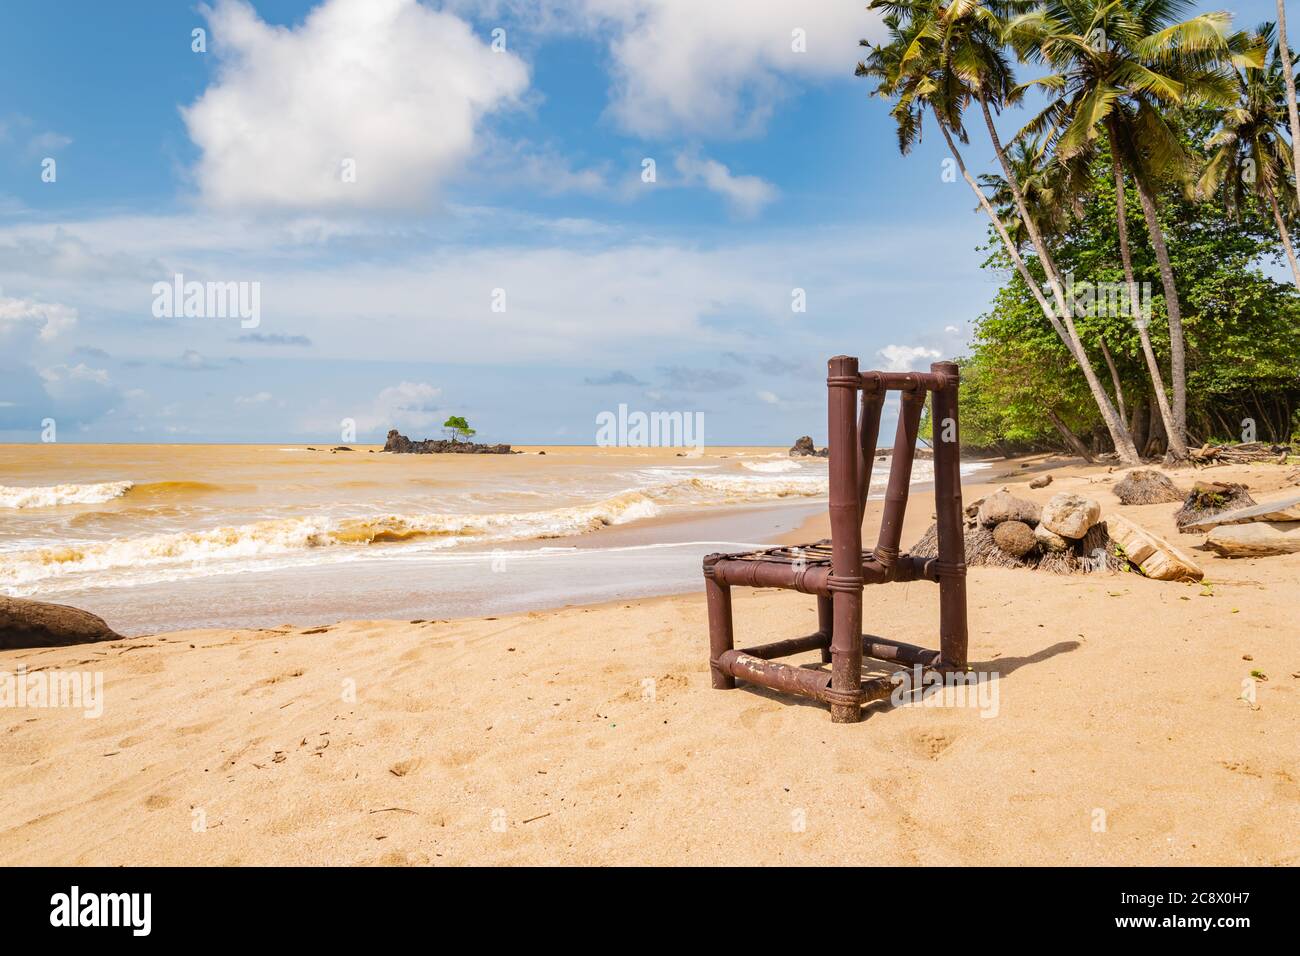 A bamboo chair standing alone on a beach in Axim Ghana West Africa Stock Photo